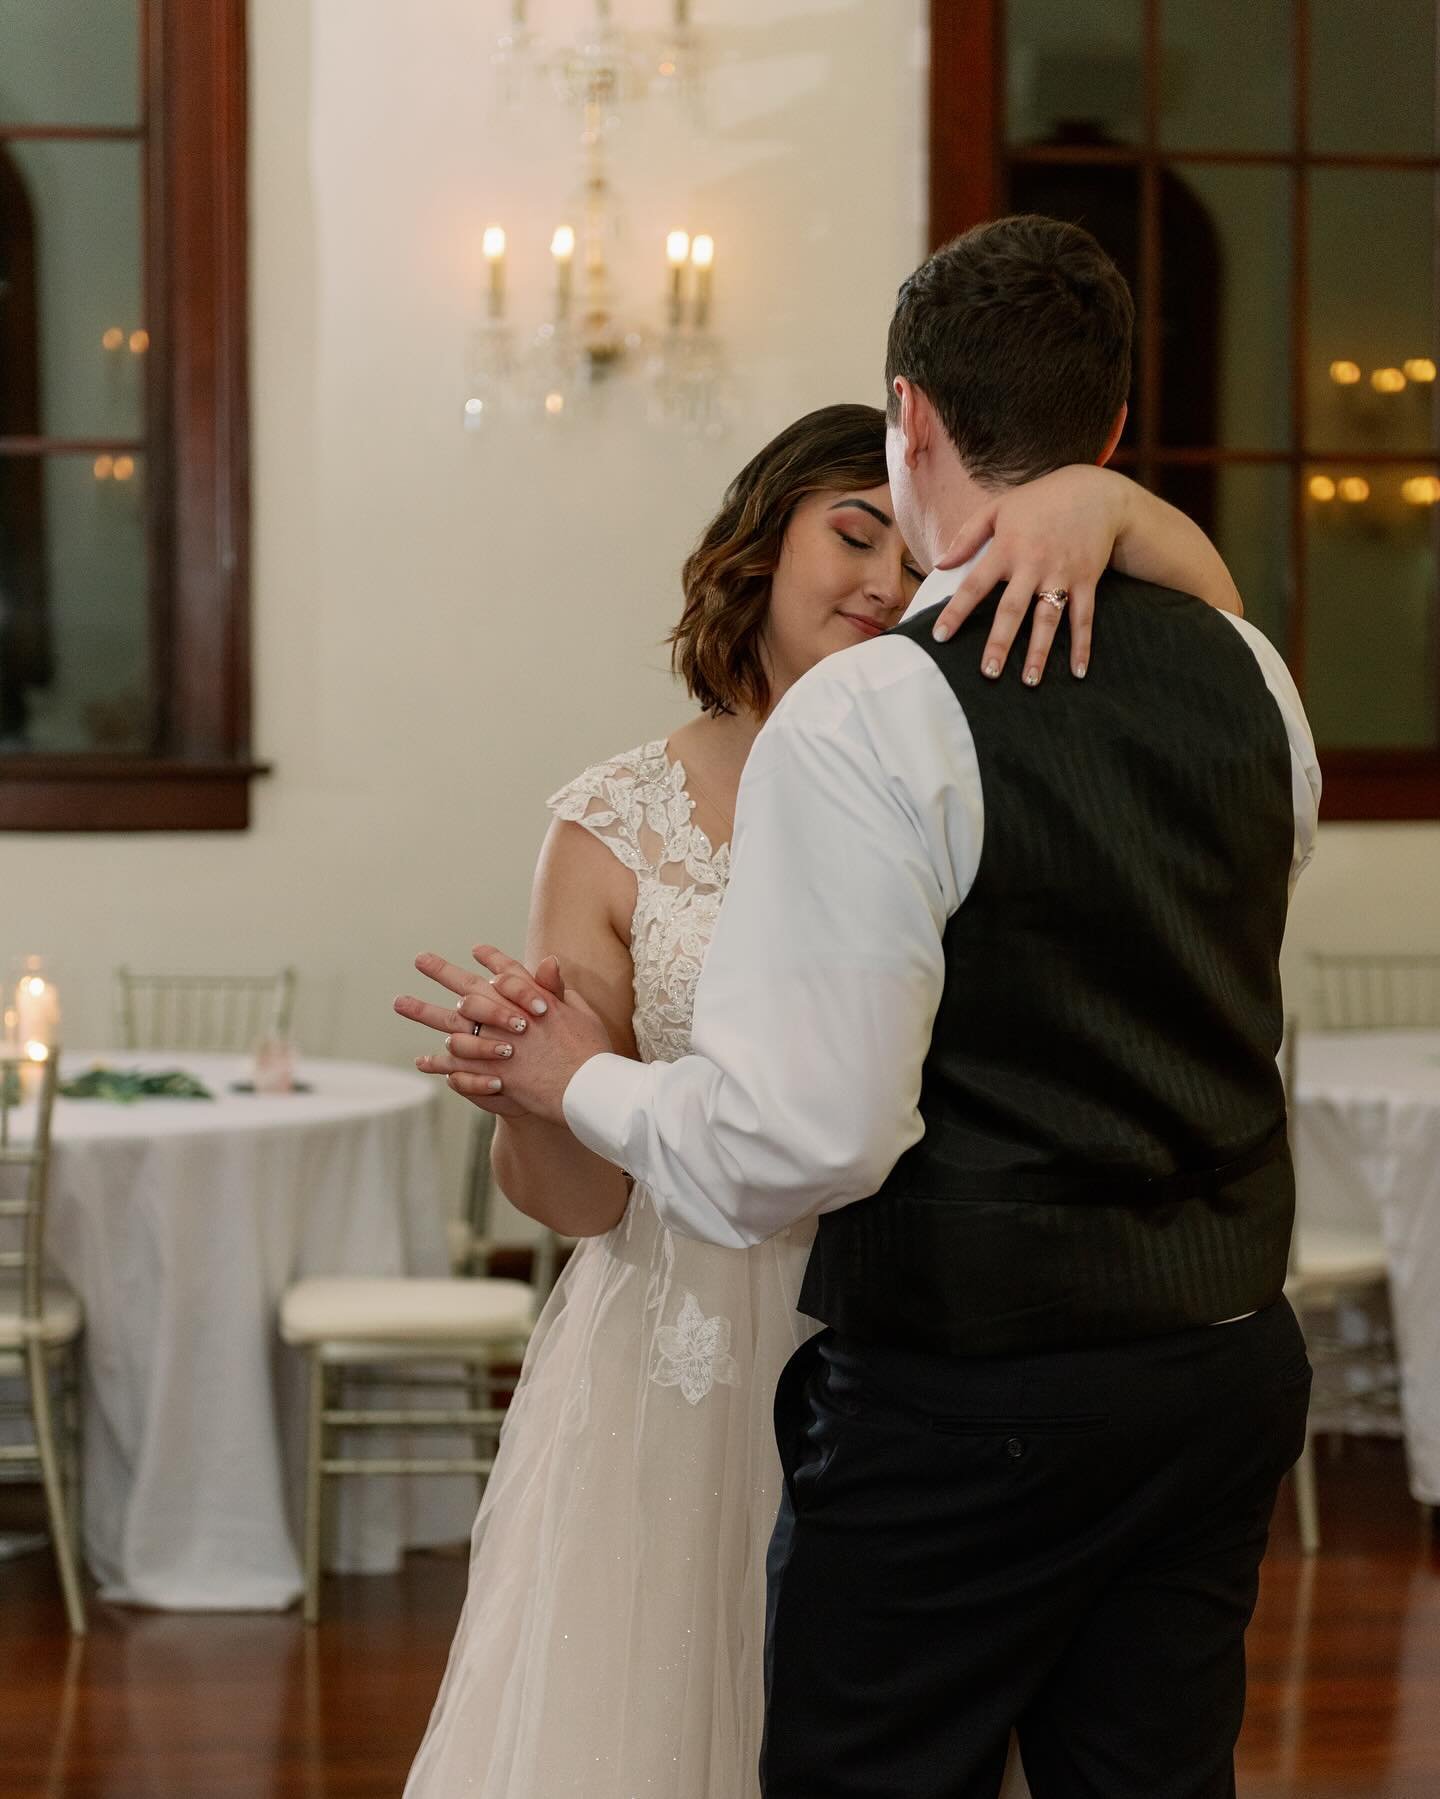 Some precious moments from Katie and Zach&rsquo;s reception 🥂
________

Photography: @brooklynfocusphoto
Makeup and hair: @prettynpinned
Bridal: @davidsbridal
Grooms wear: @menswearhouse 
Coordination: @seasyourdayevents